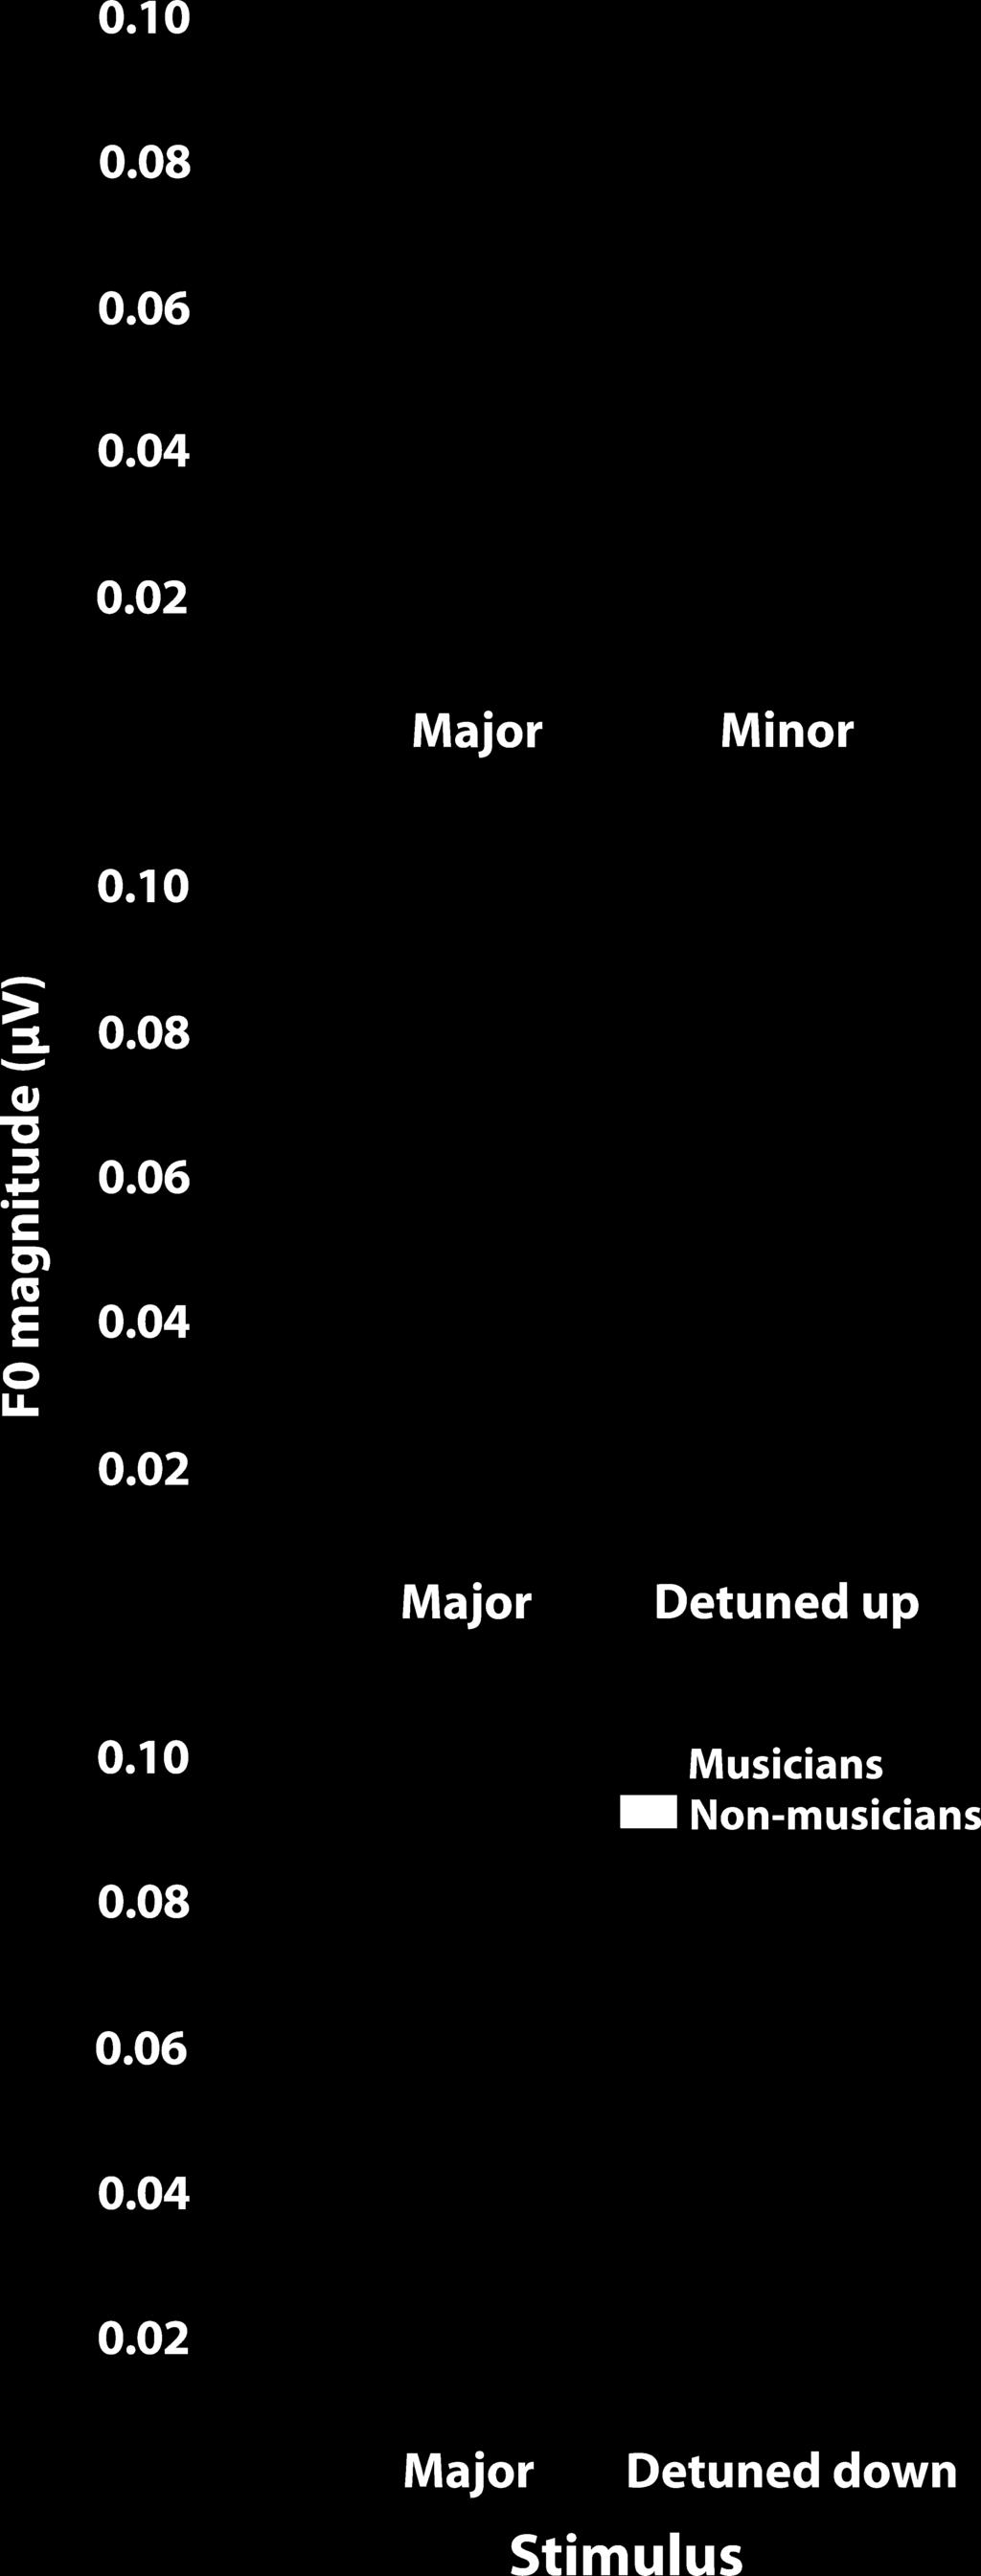 Non-musicians, however, only discriminate the major minor pairing above threshold and are unable to accurately differentiate standard musical chords from their detuned versions (i.e. subthreshold discrimination, major up and minor down).